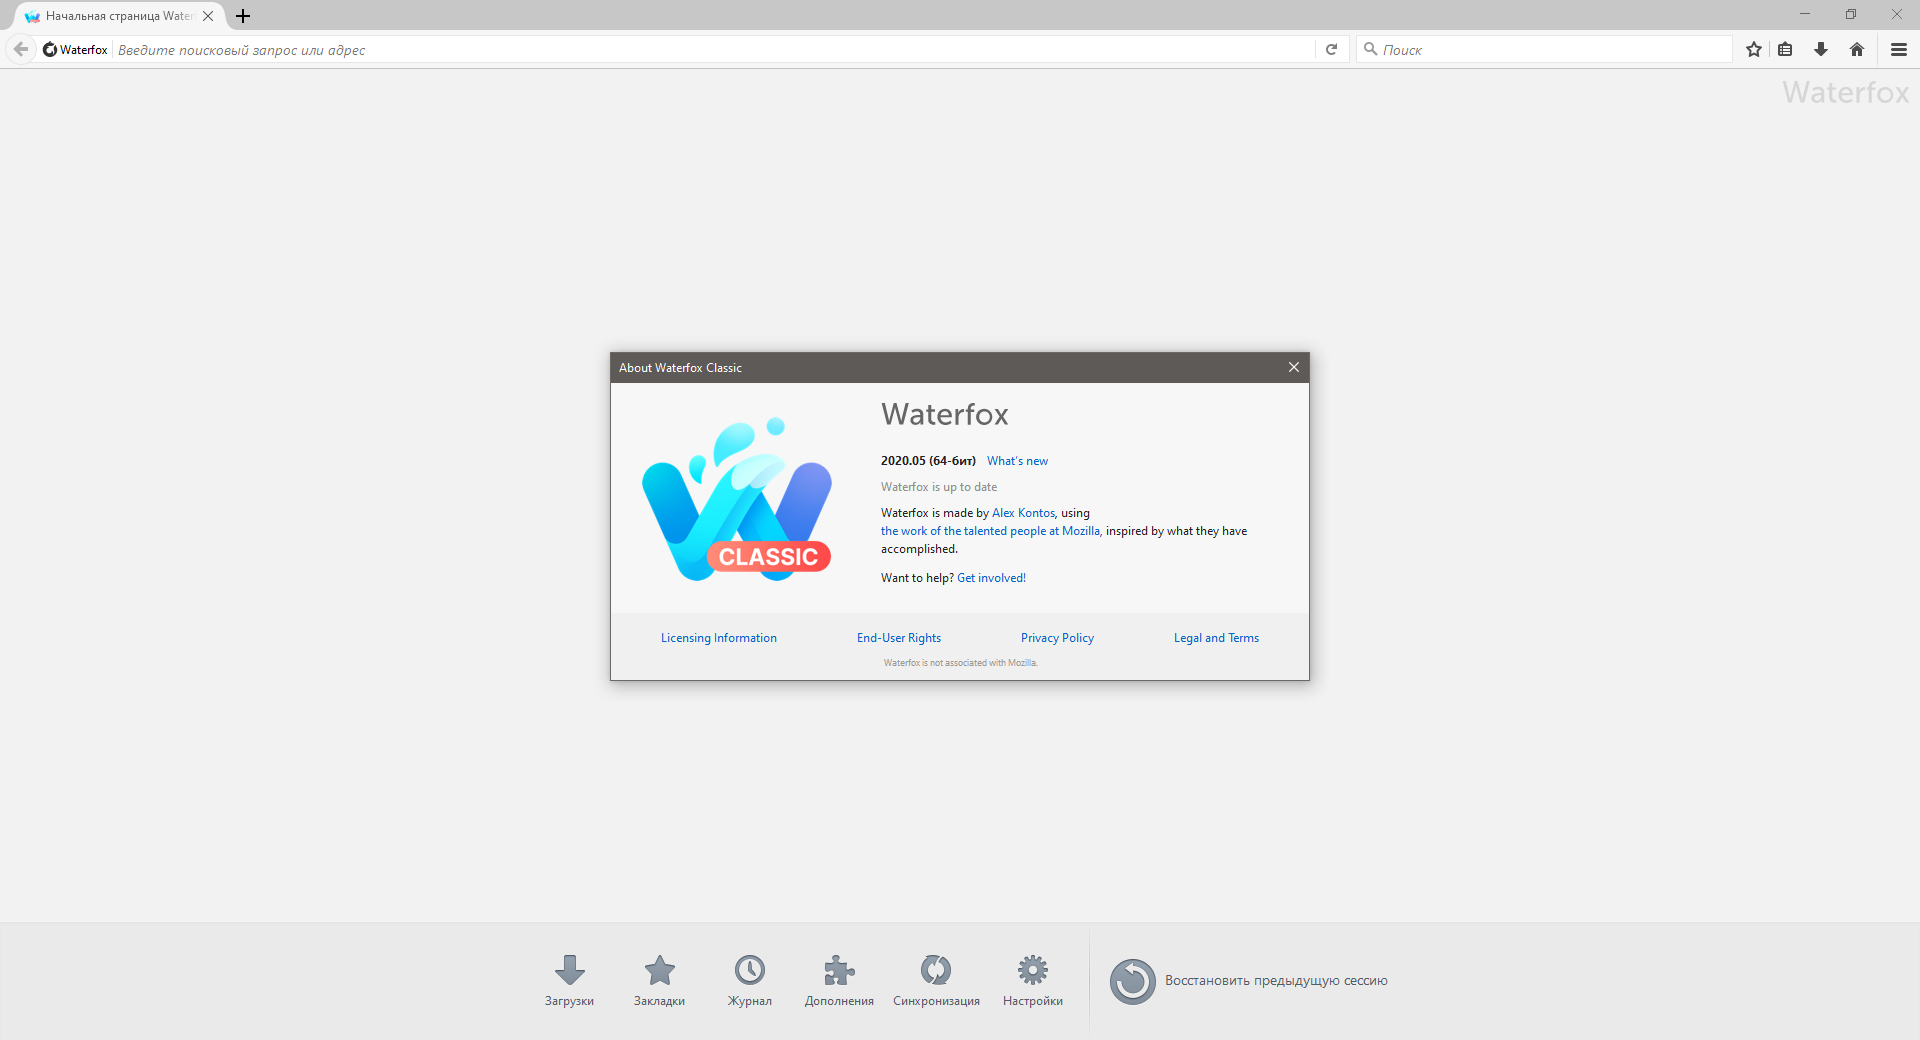 Waterfox Current G5.1.9 free